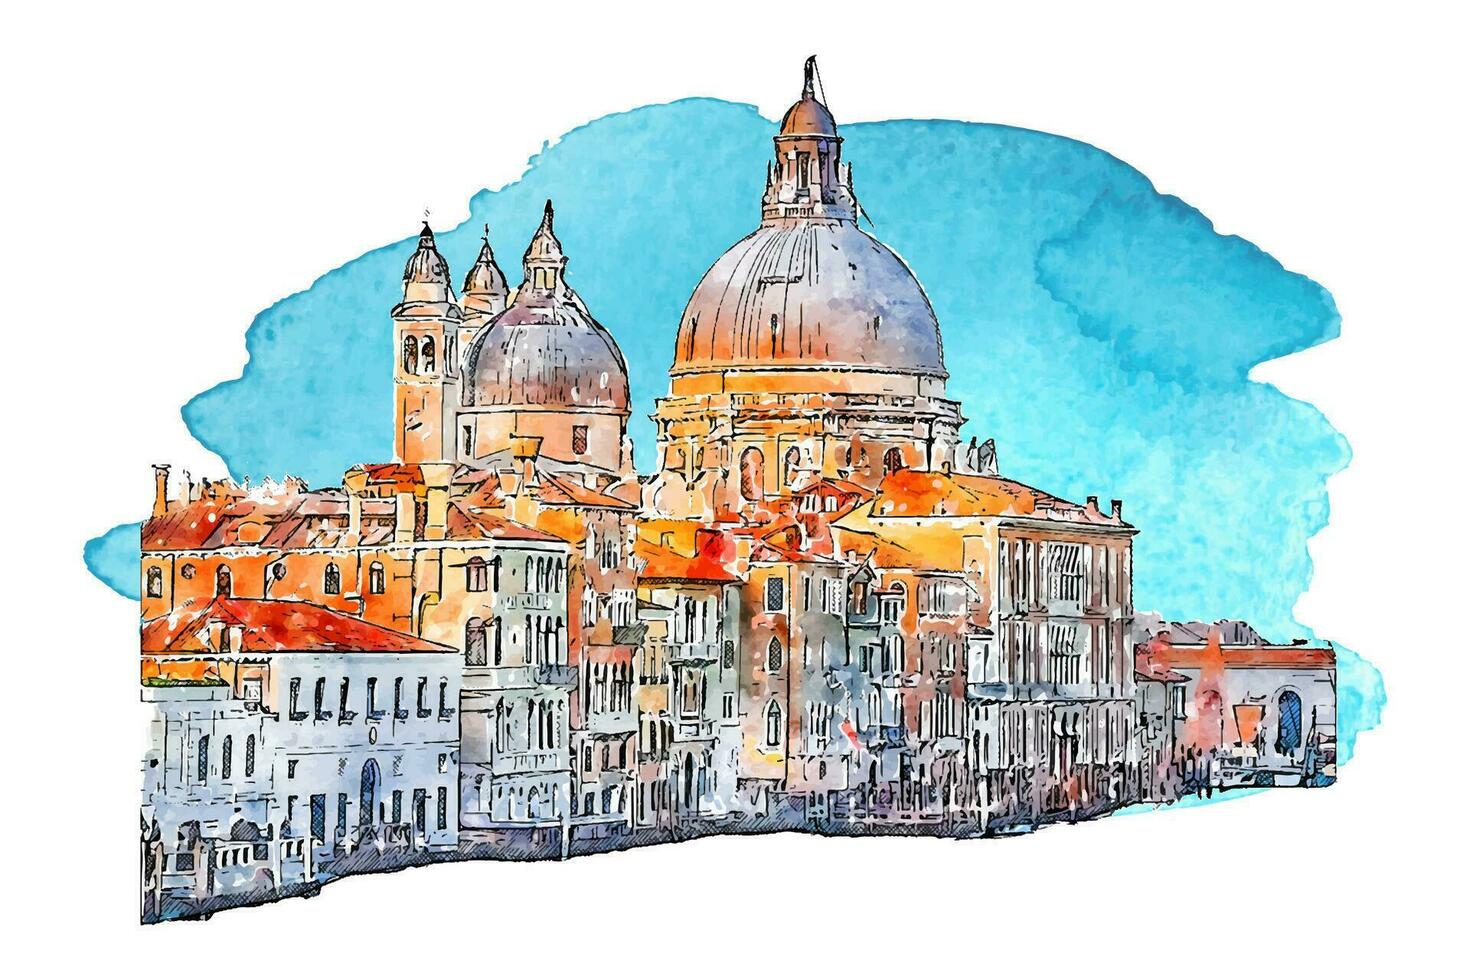 Venice italy watercolor hand drawn illustration isolated on white background vector